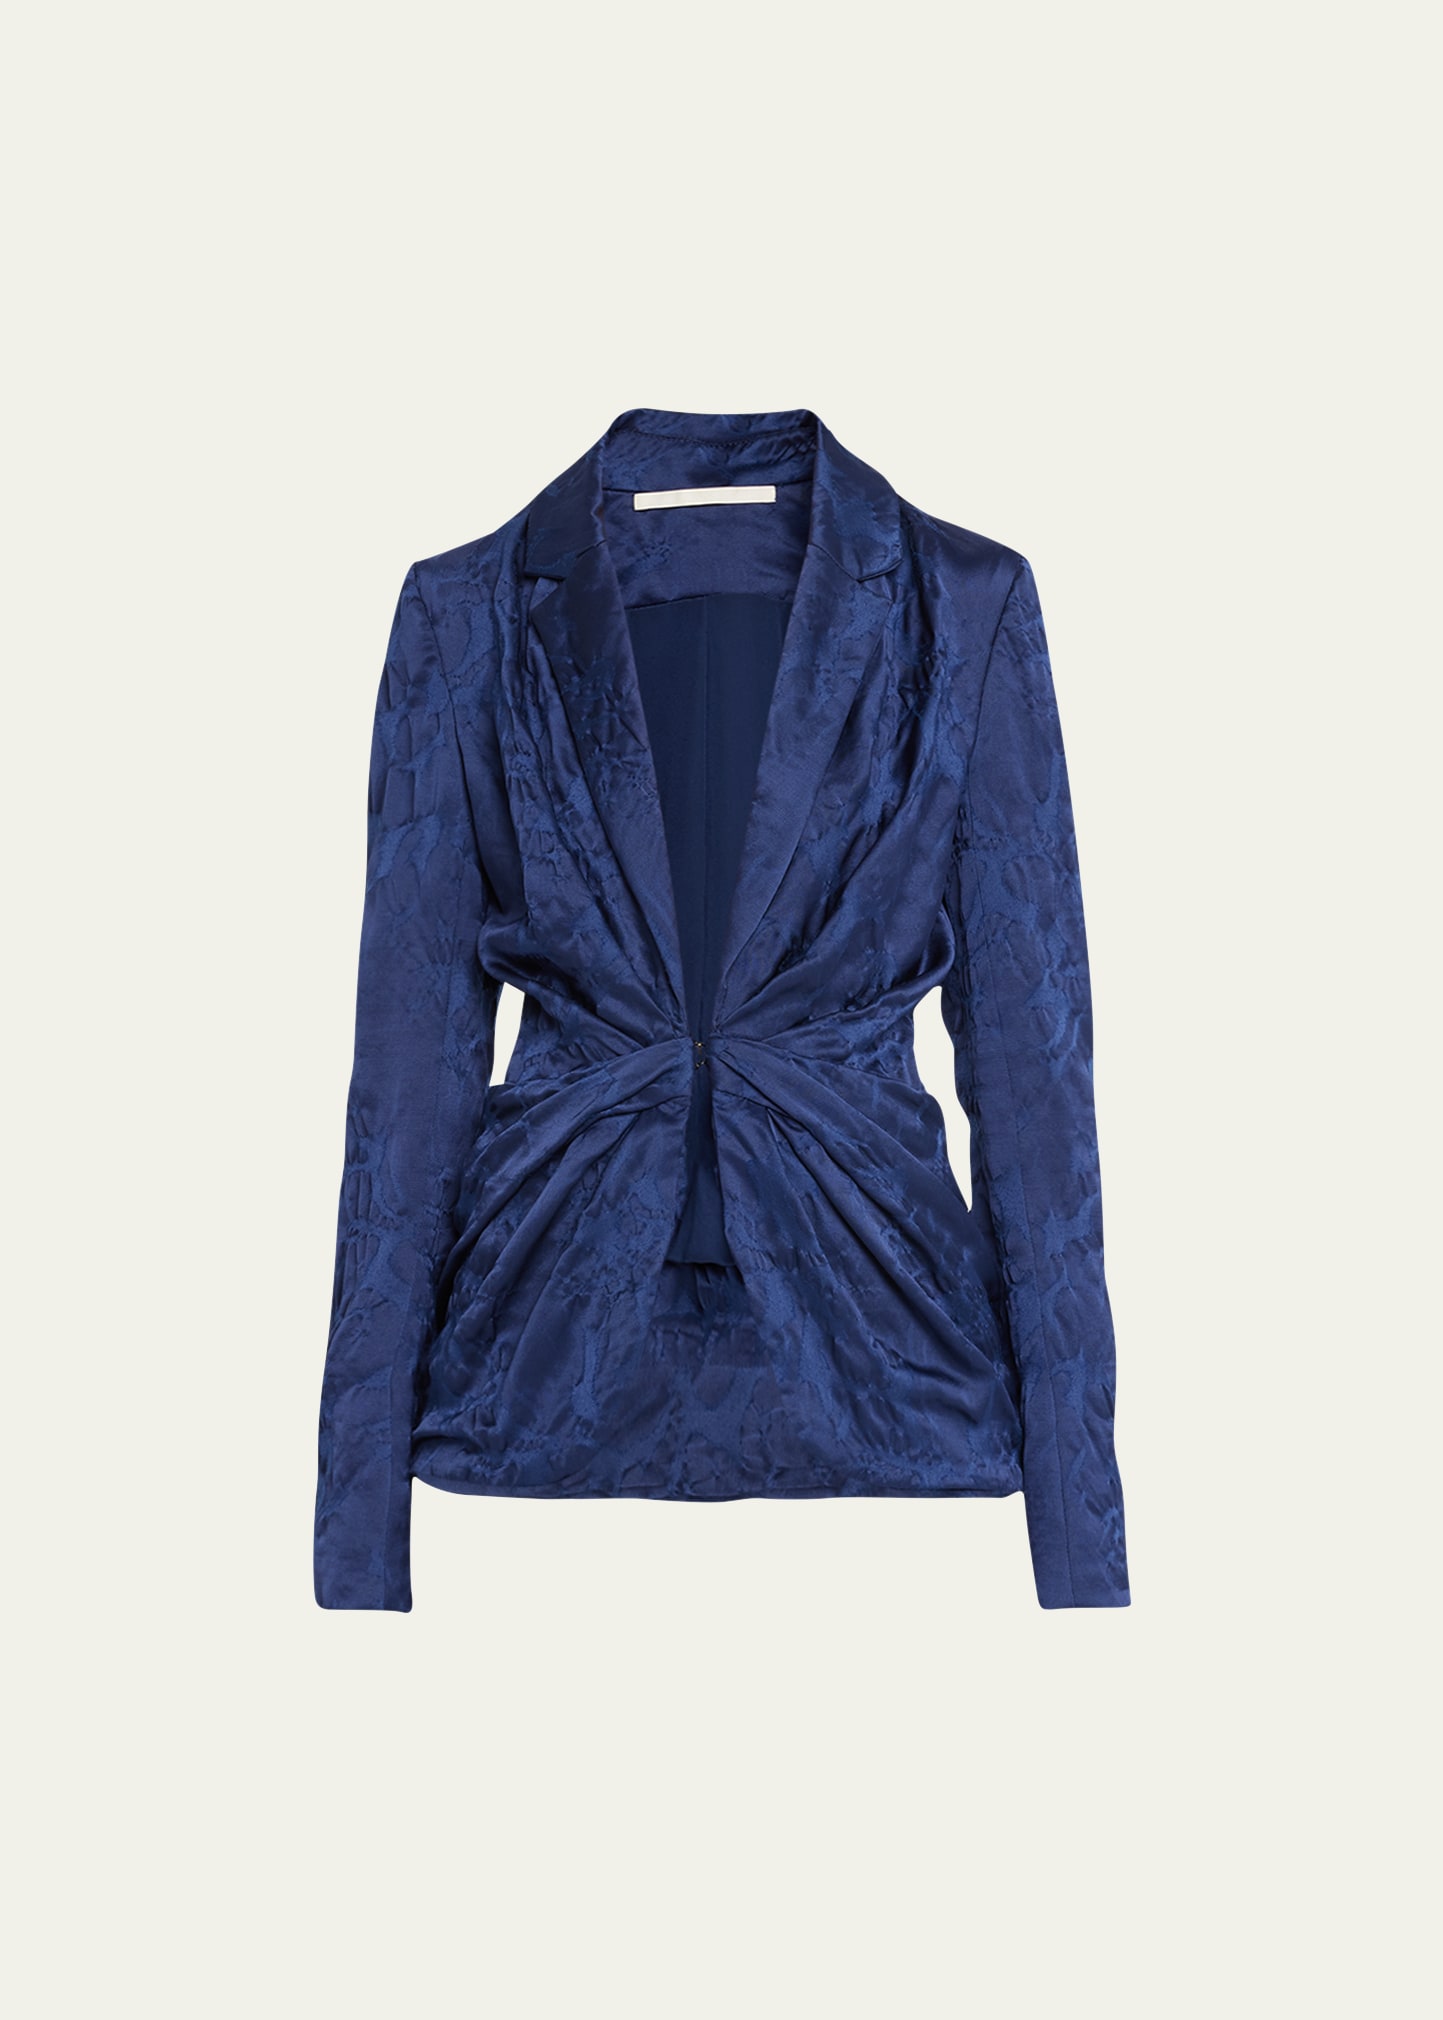 Jason Wu Collection Draped Floral Cloque Jacquard Blazer In Bright Navy